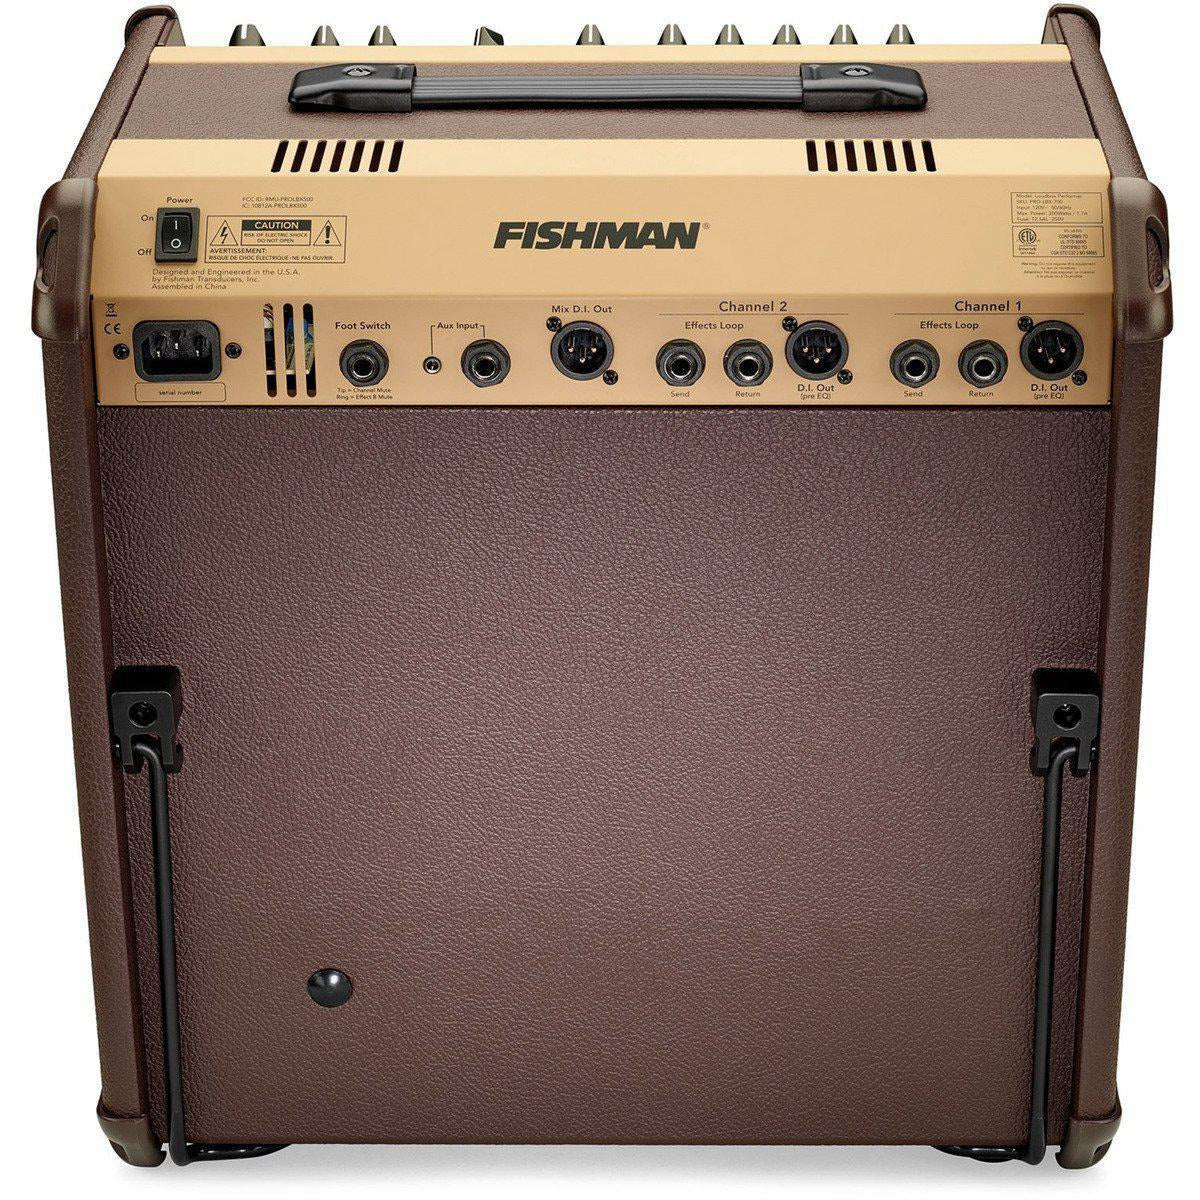 Fishman Loudbox Performer Bluetooth Acoustic Guitar Amplifier PROLBT700-Andy's Music